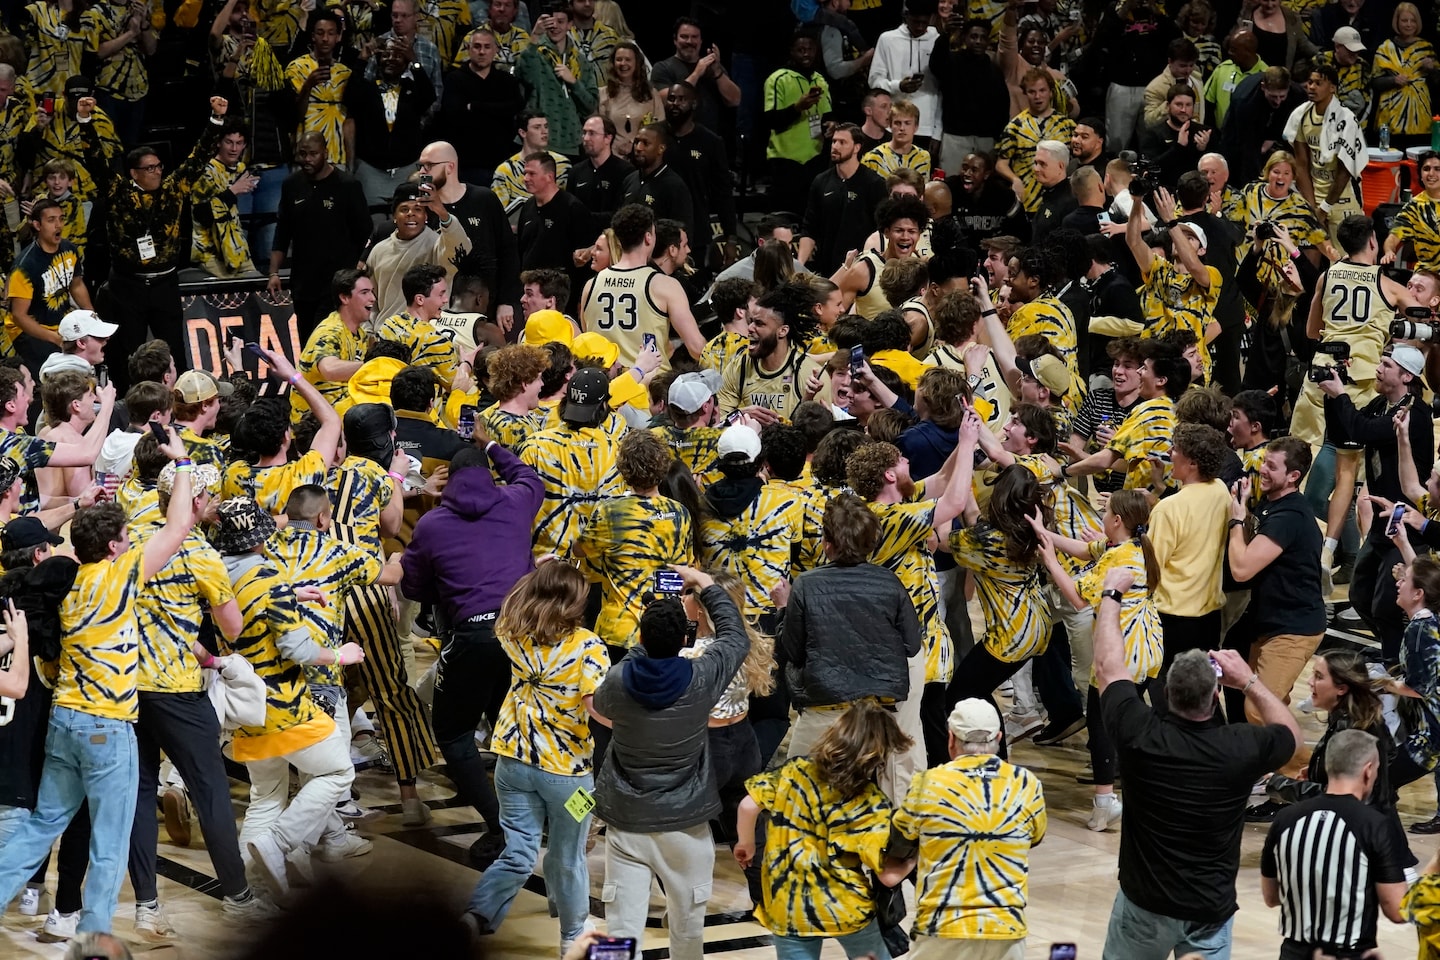 When it comes to court storming, something’s ‘gotta change.’ But will it?